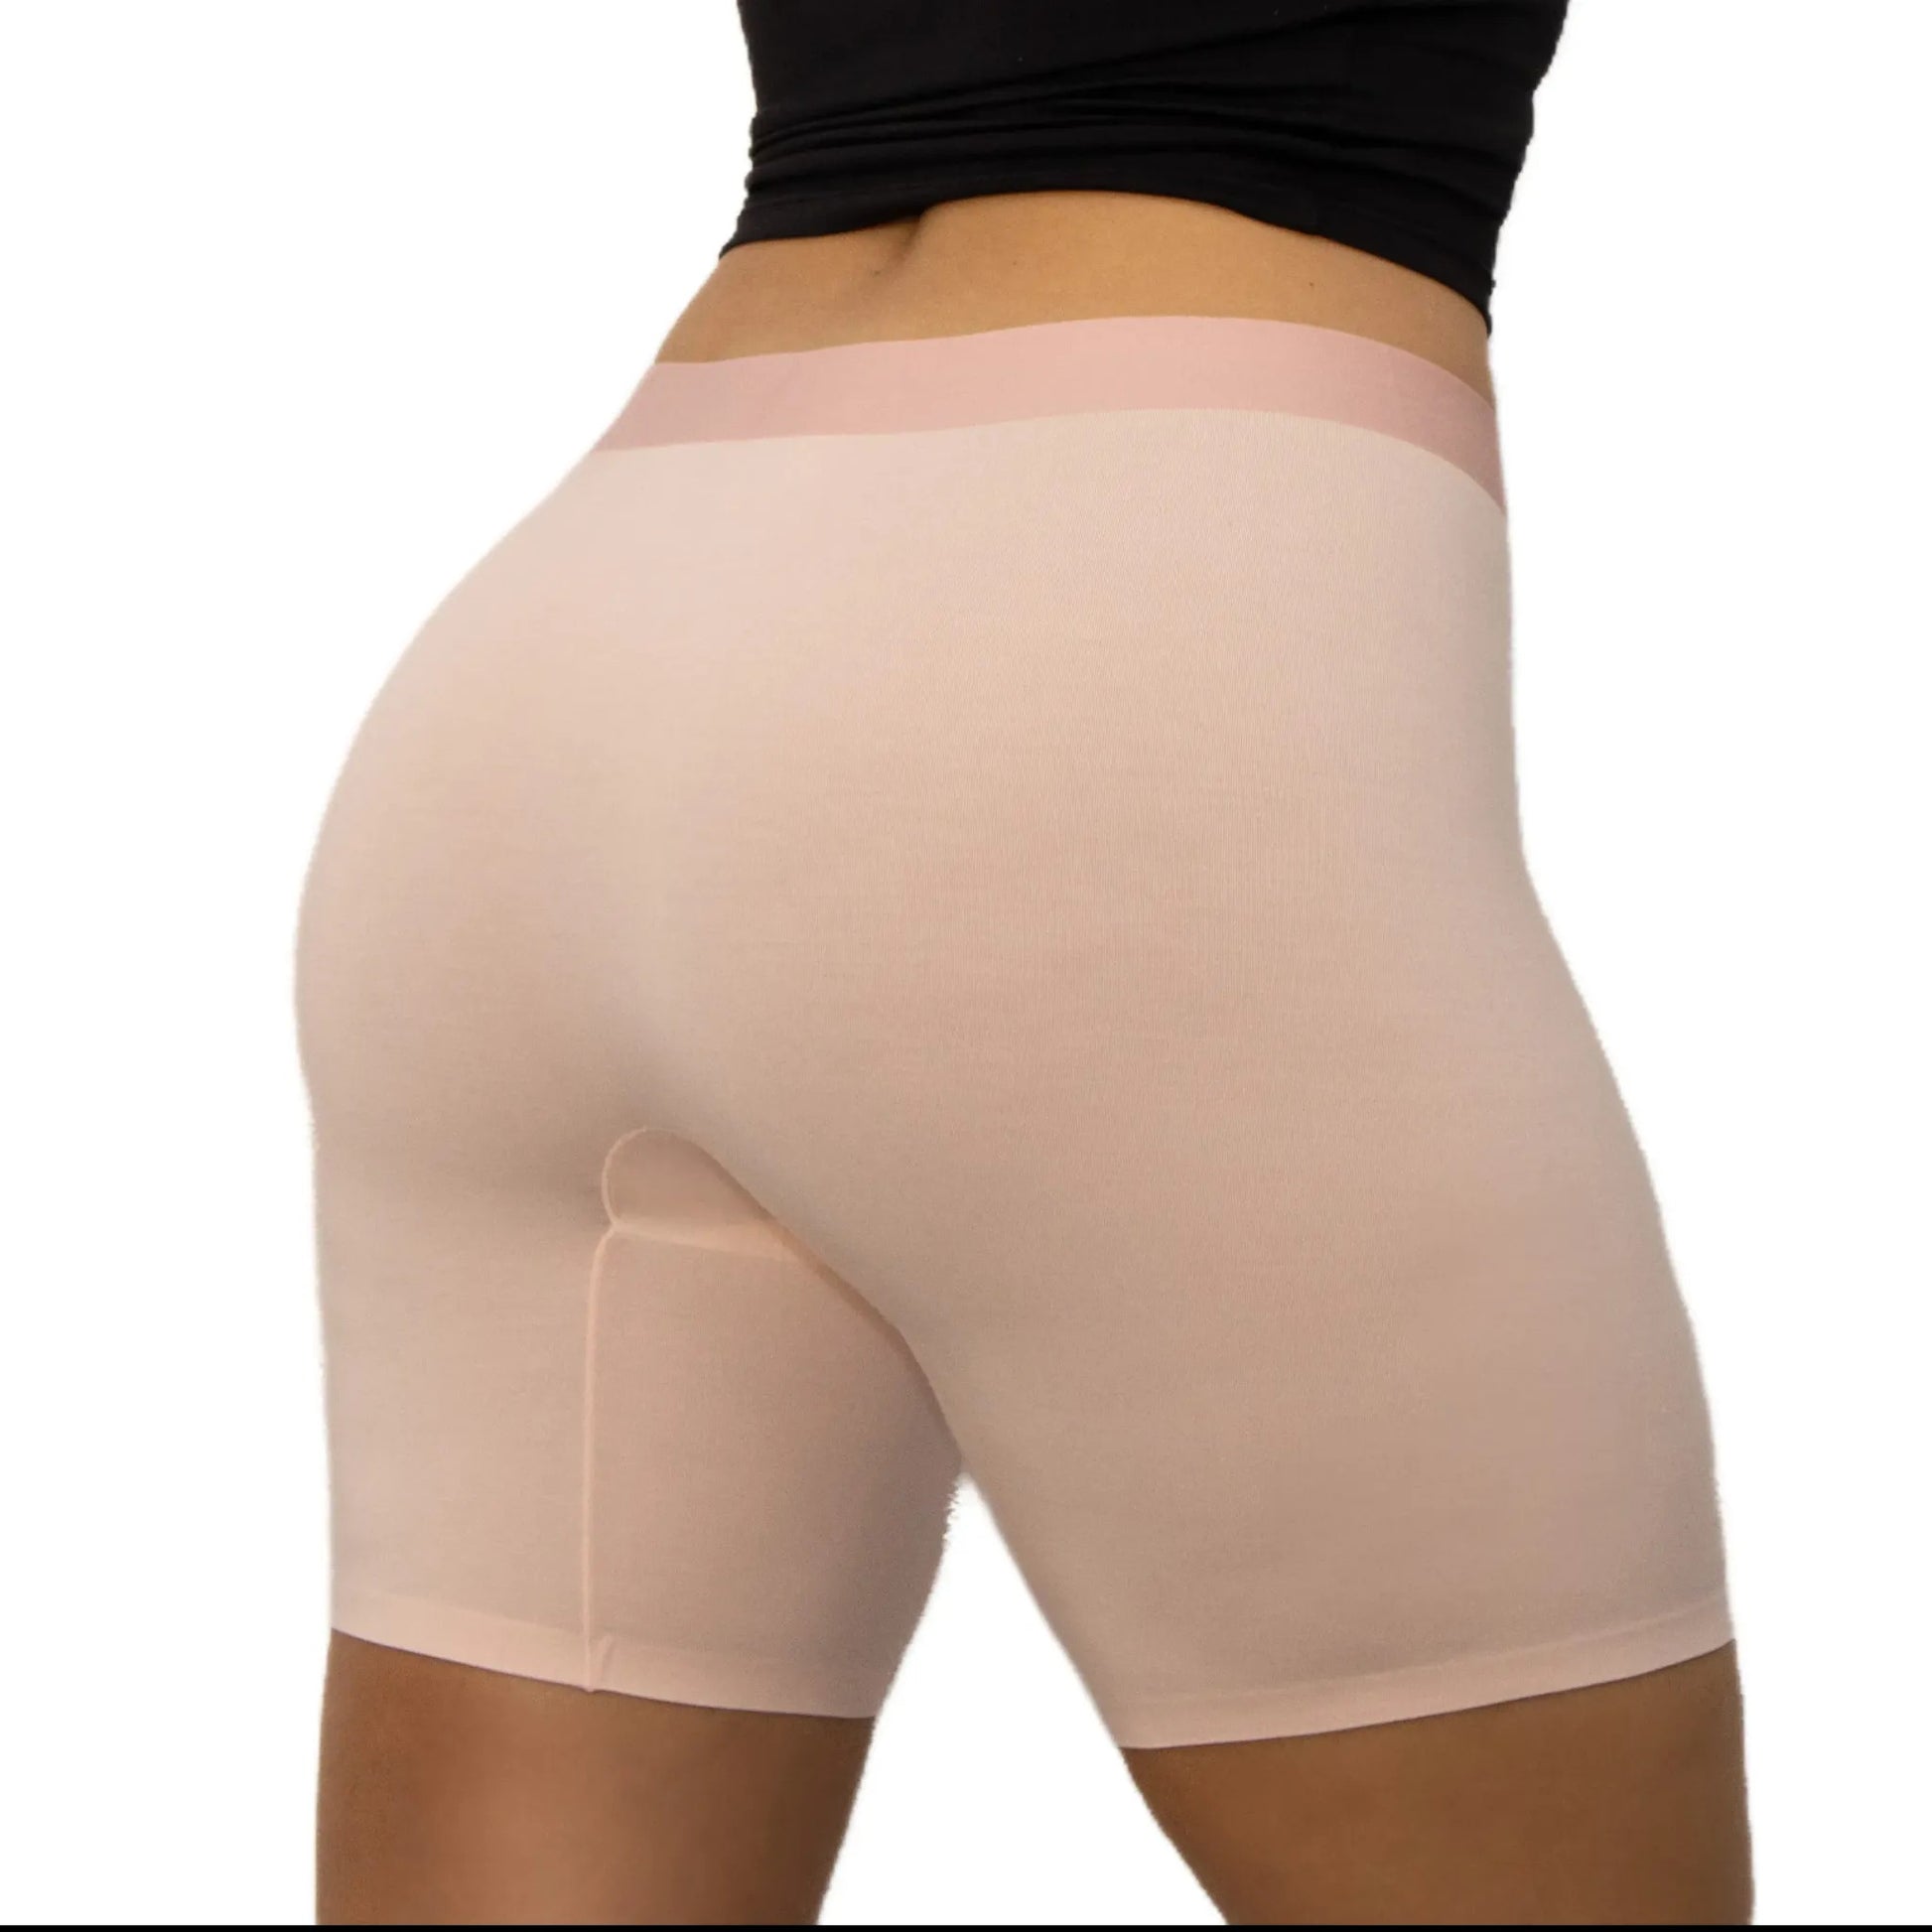 puresnug ladies' boxer briefs side view in pink colour